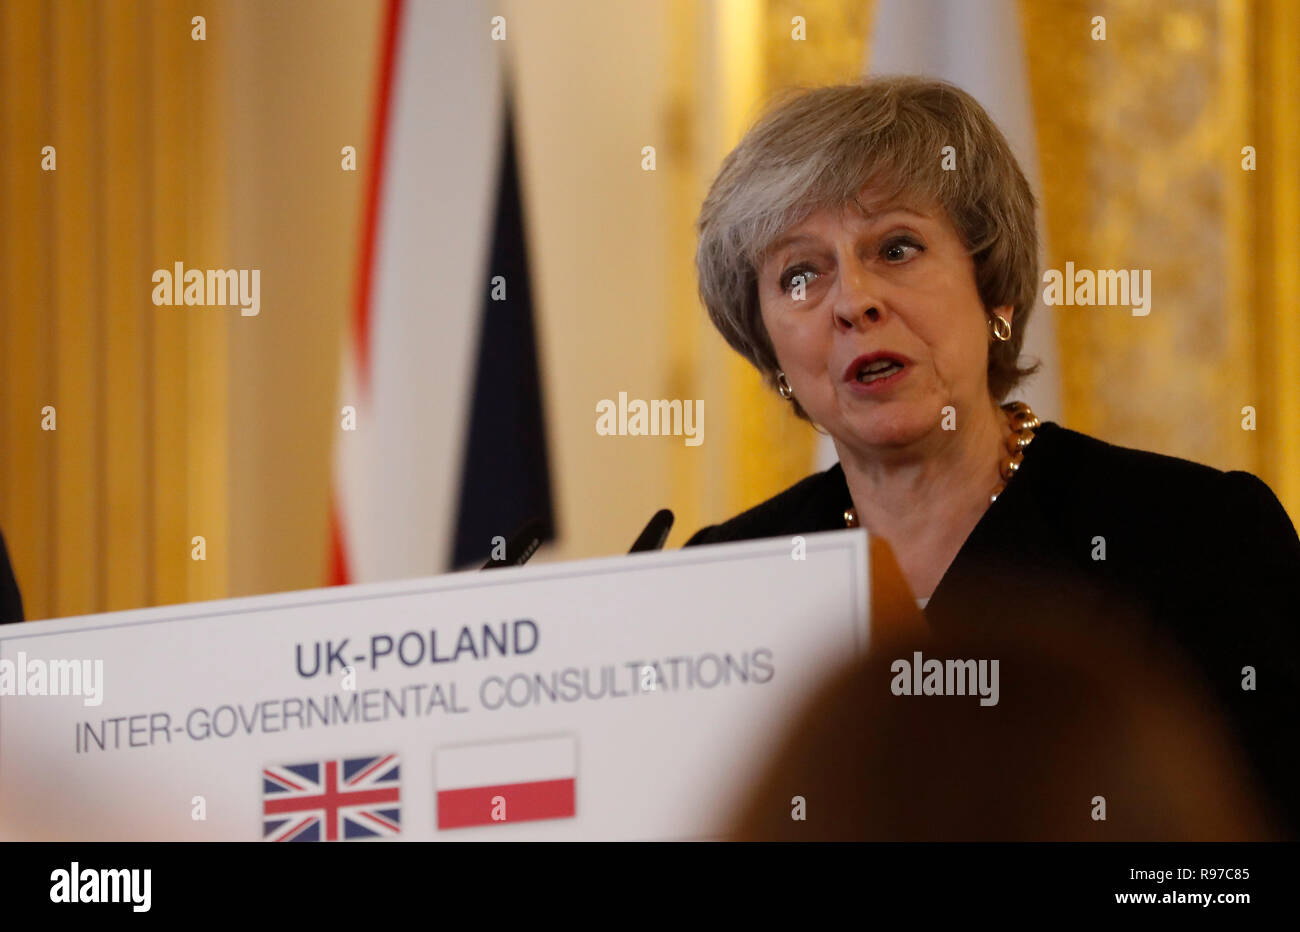 Prime Minister Theresa May during a press conference following the UK-Poland Inter-Governmental Consultations at Lancaster House, London. Stock Photo